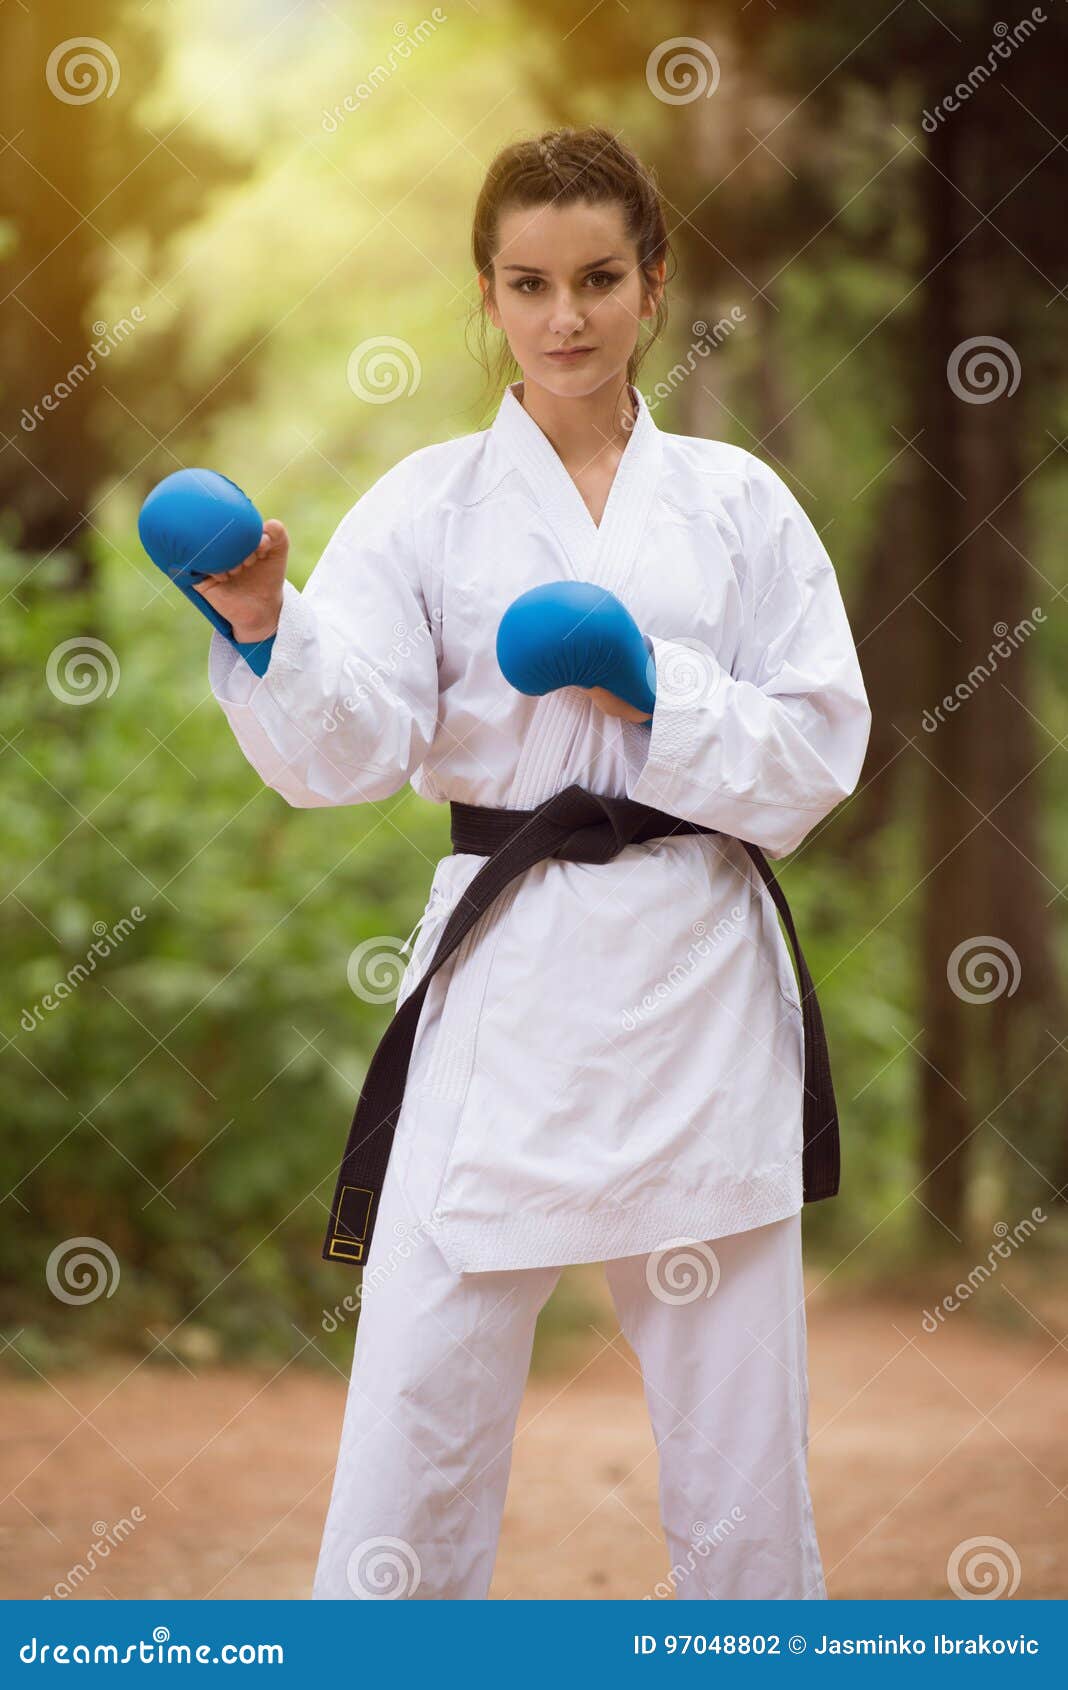 Woman in White Training Karate at Park Stock Photo - Image of lifestyle ...